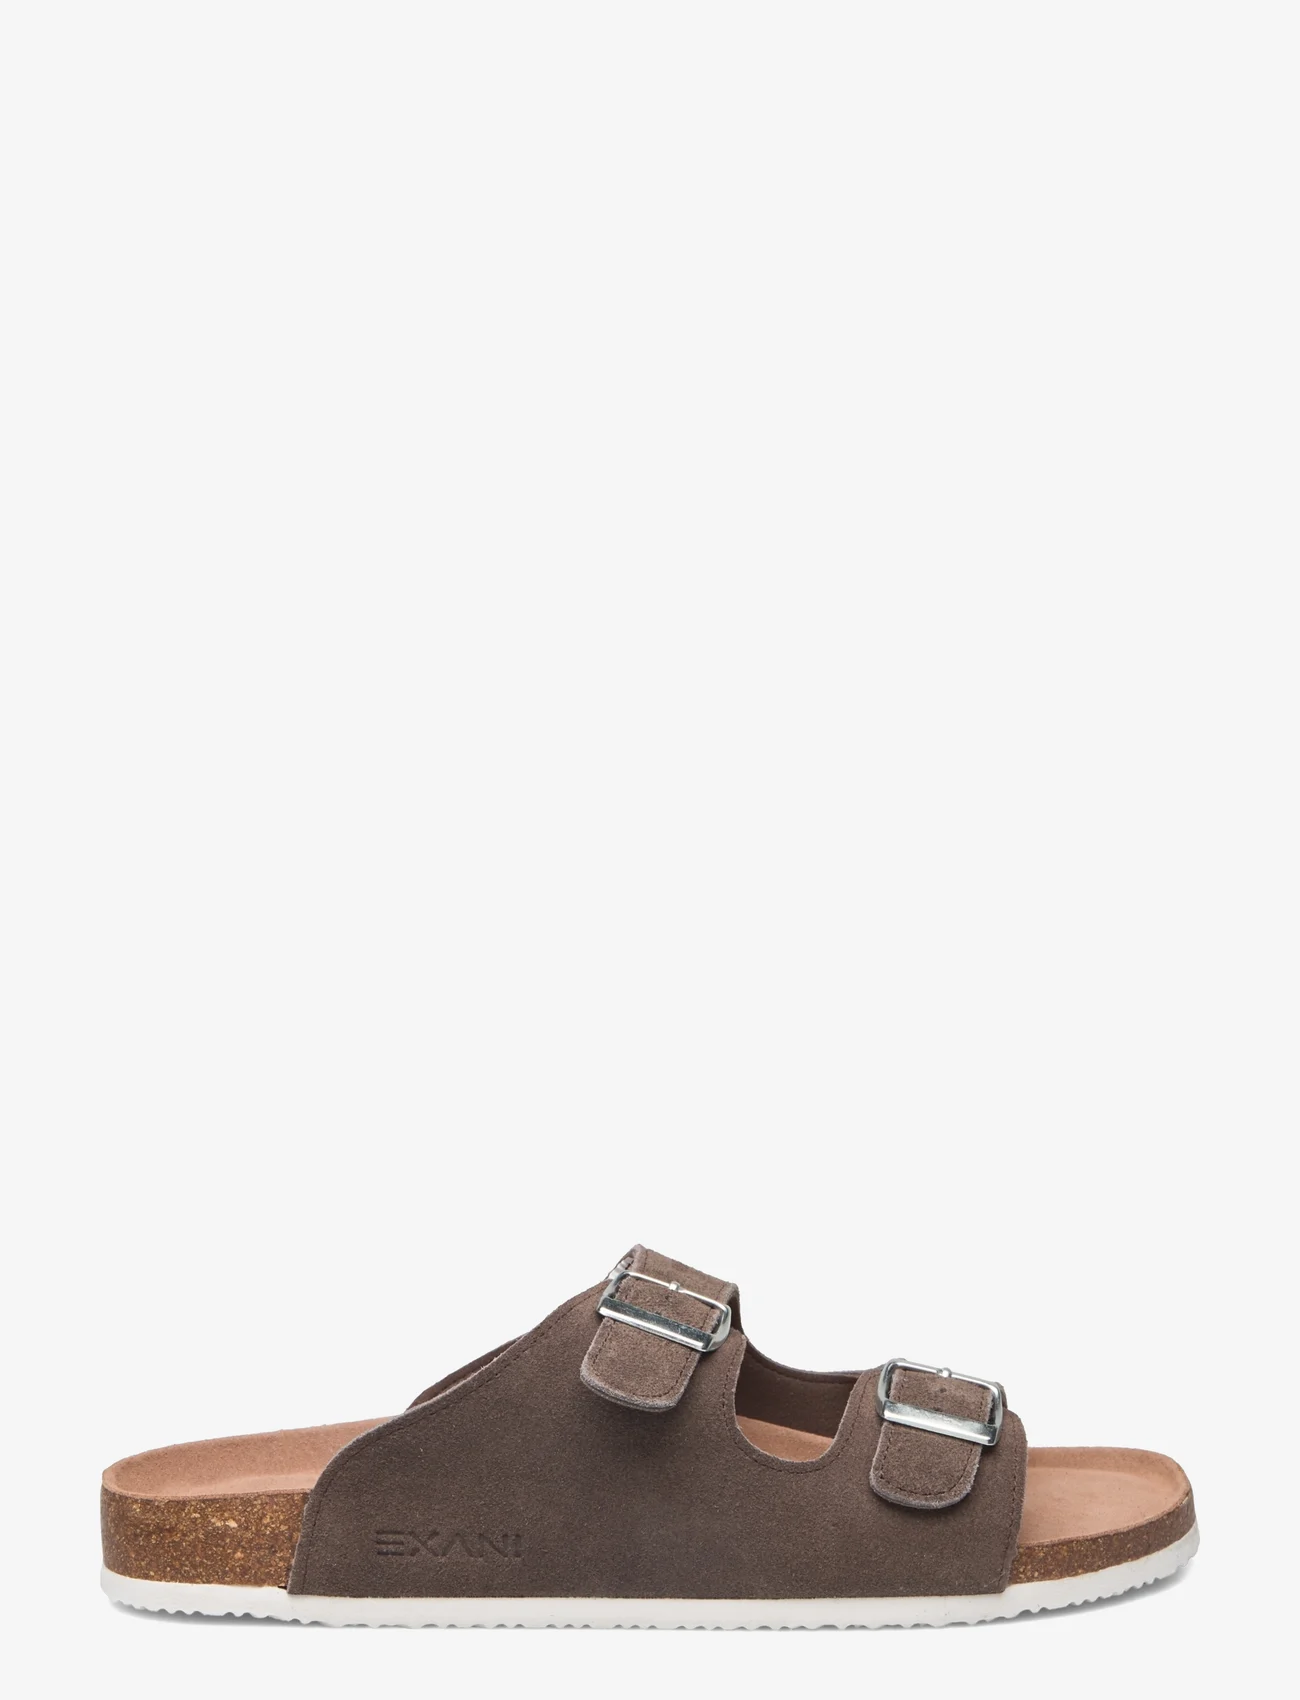 Exani - SPECTRA SUEDE M - sandals - brown - 1